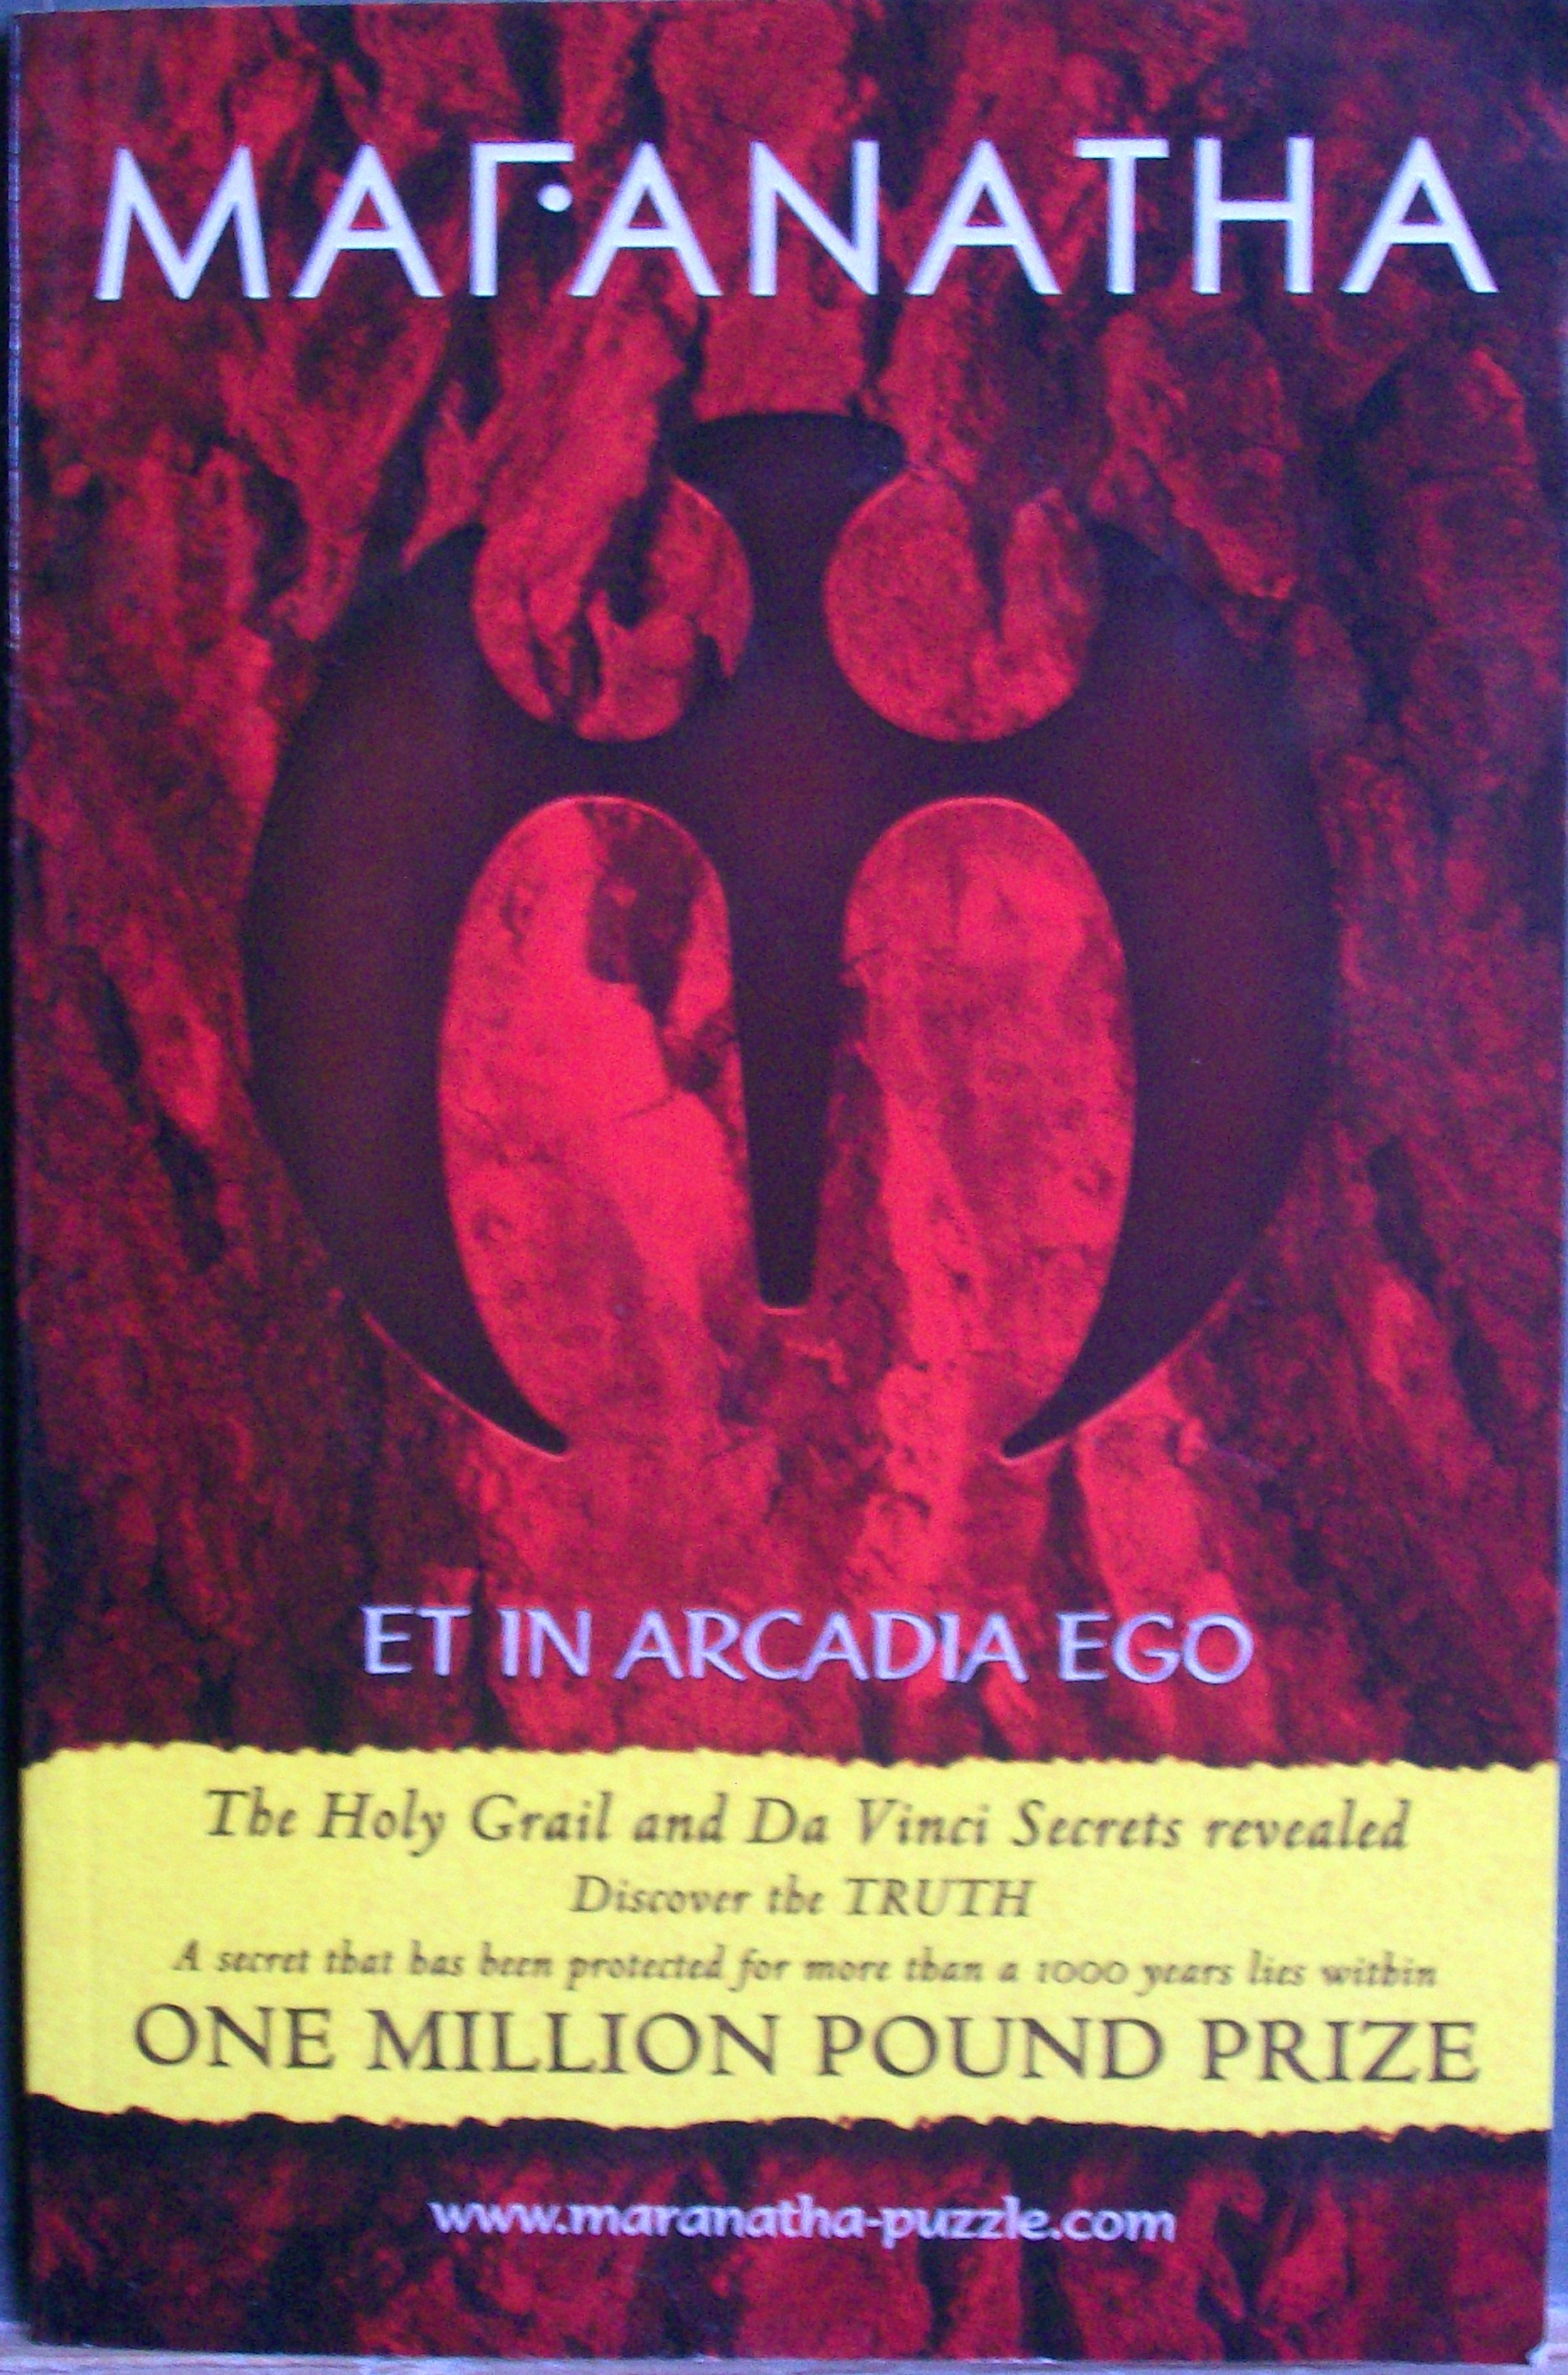 Six Questions with Duncan Burden: Author of Maranatha-Et in Arcadia Ego